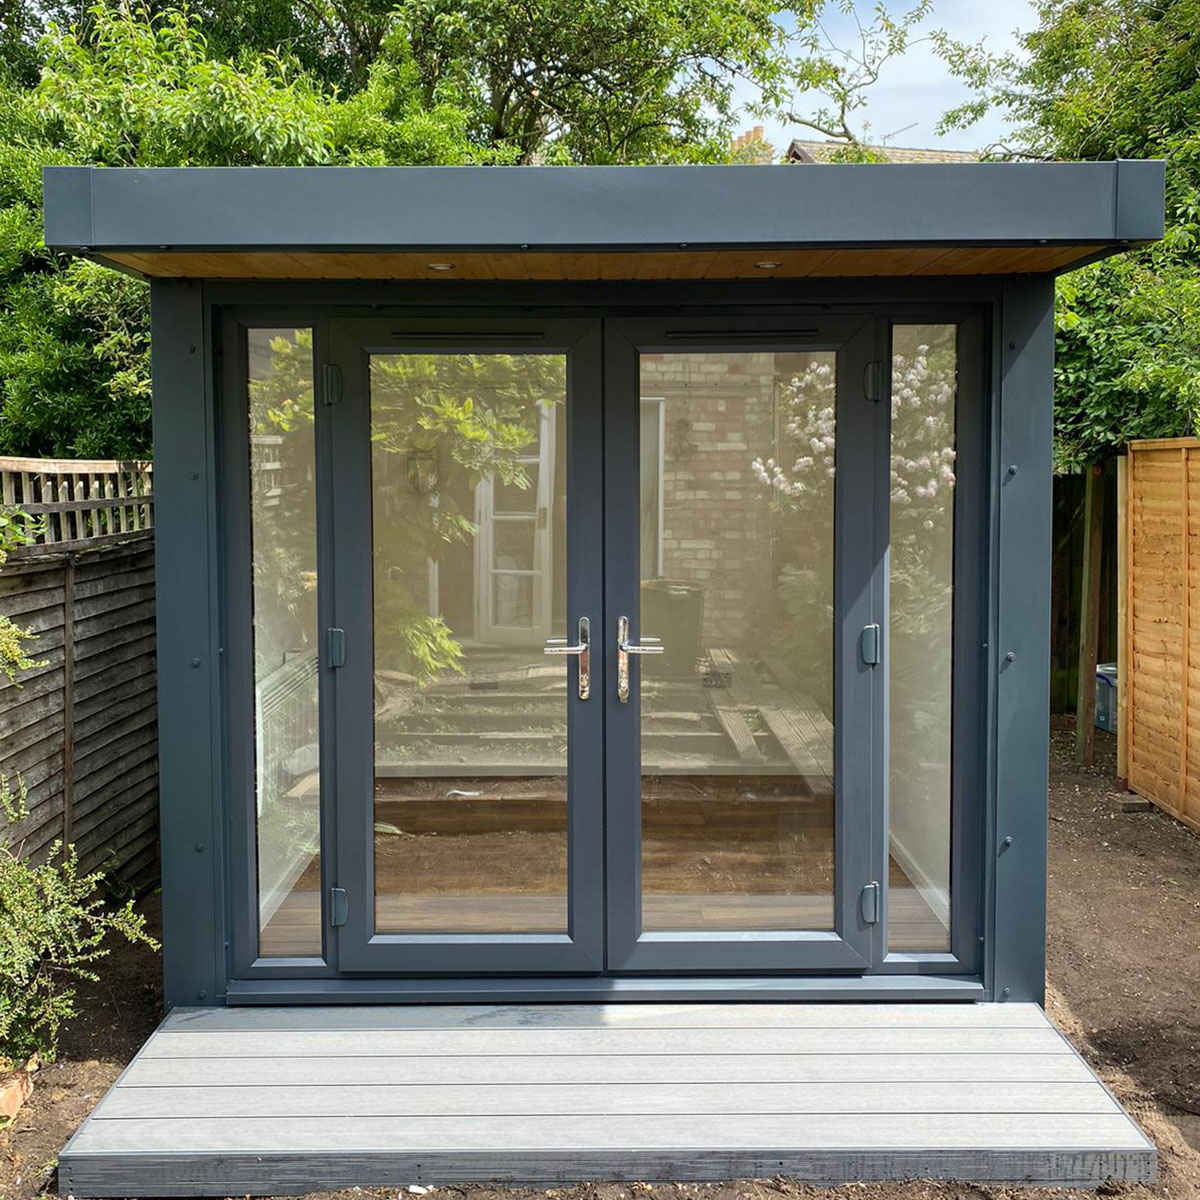 Newly constructed garden room